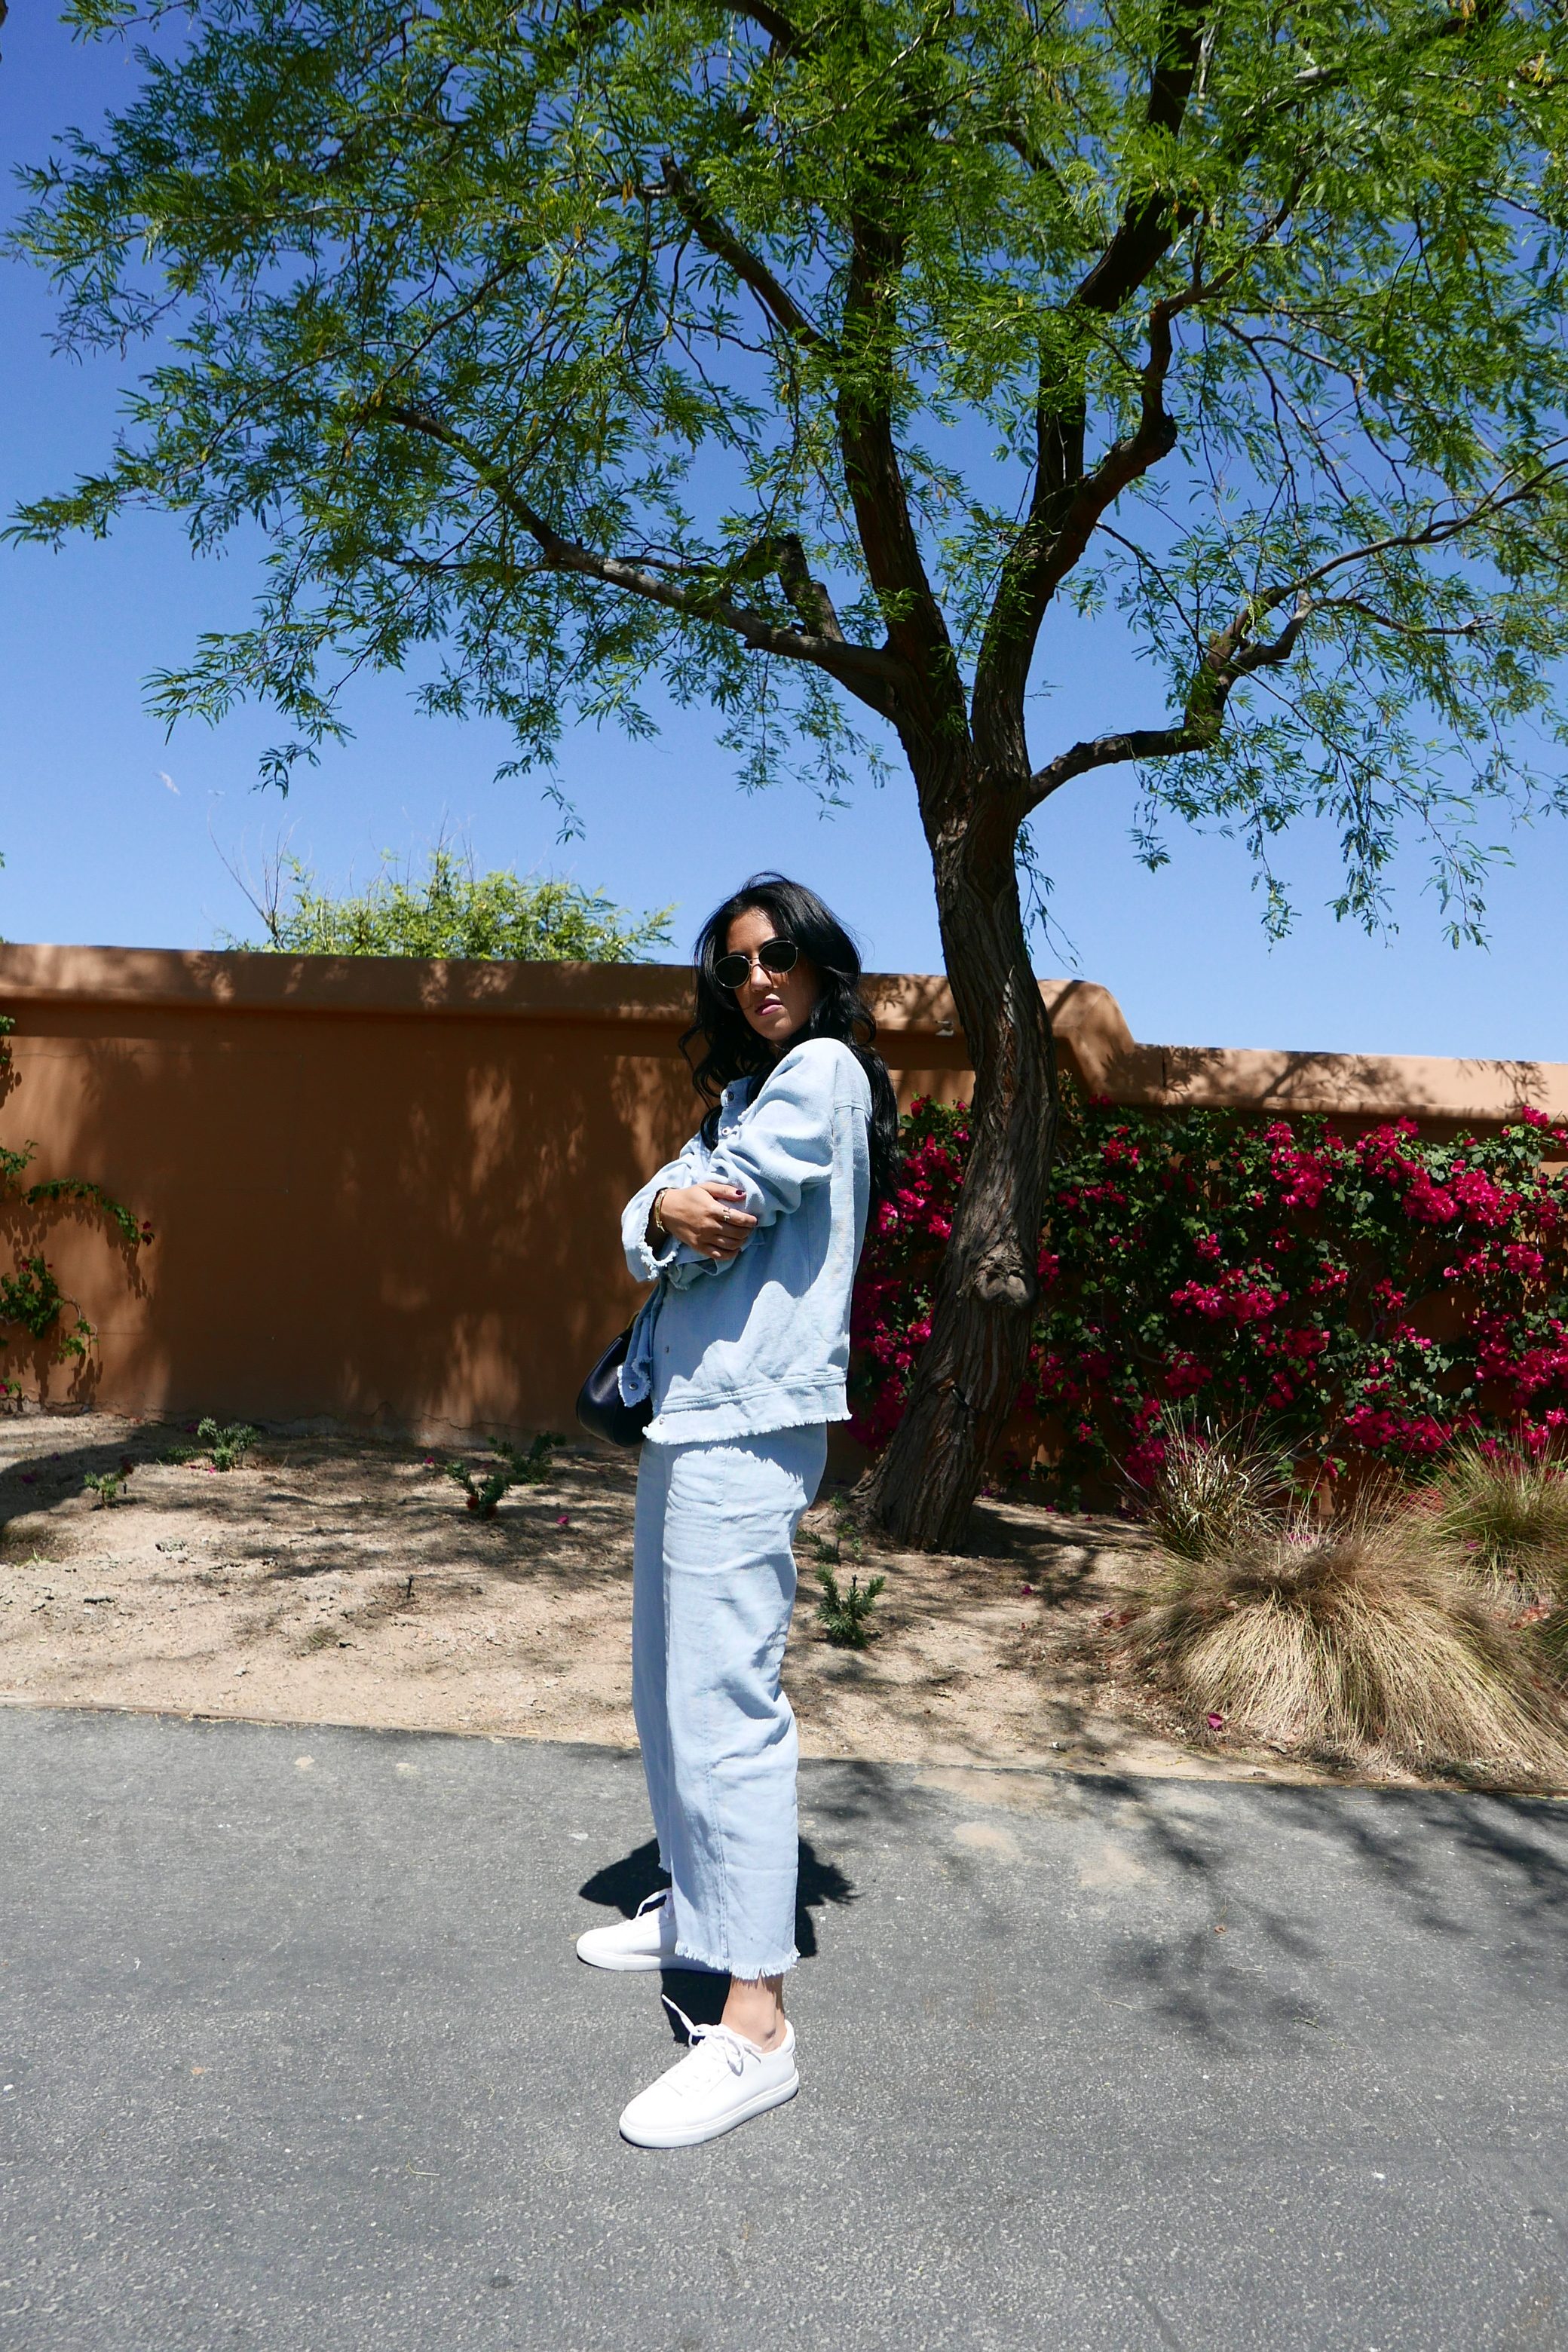 LA Blogger Tania Sarin on coachella weekend featuring festival style with moonriver two piece set